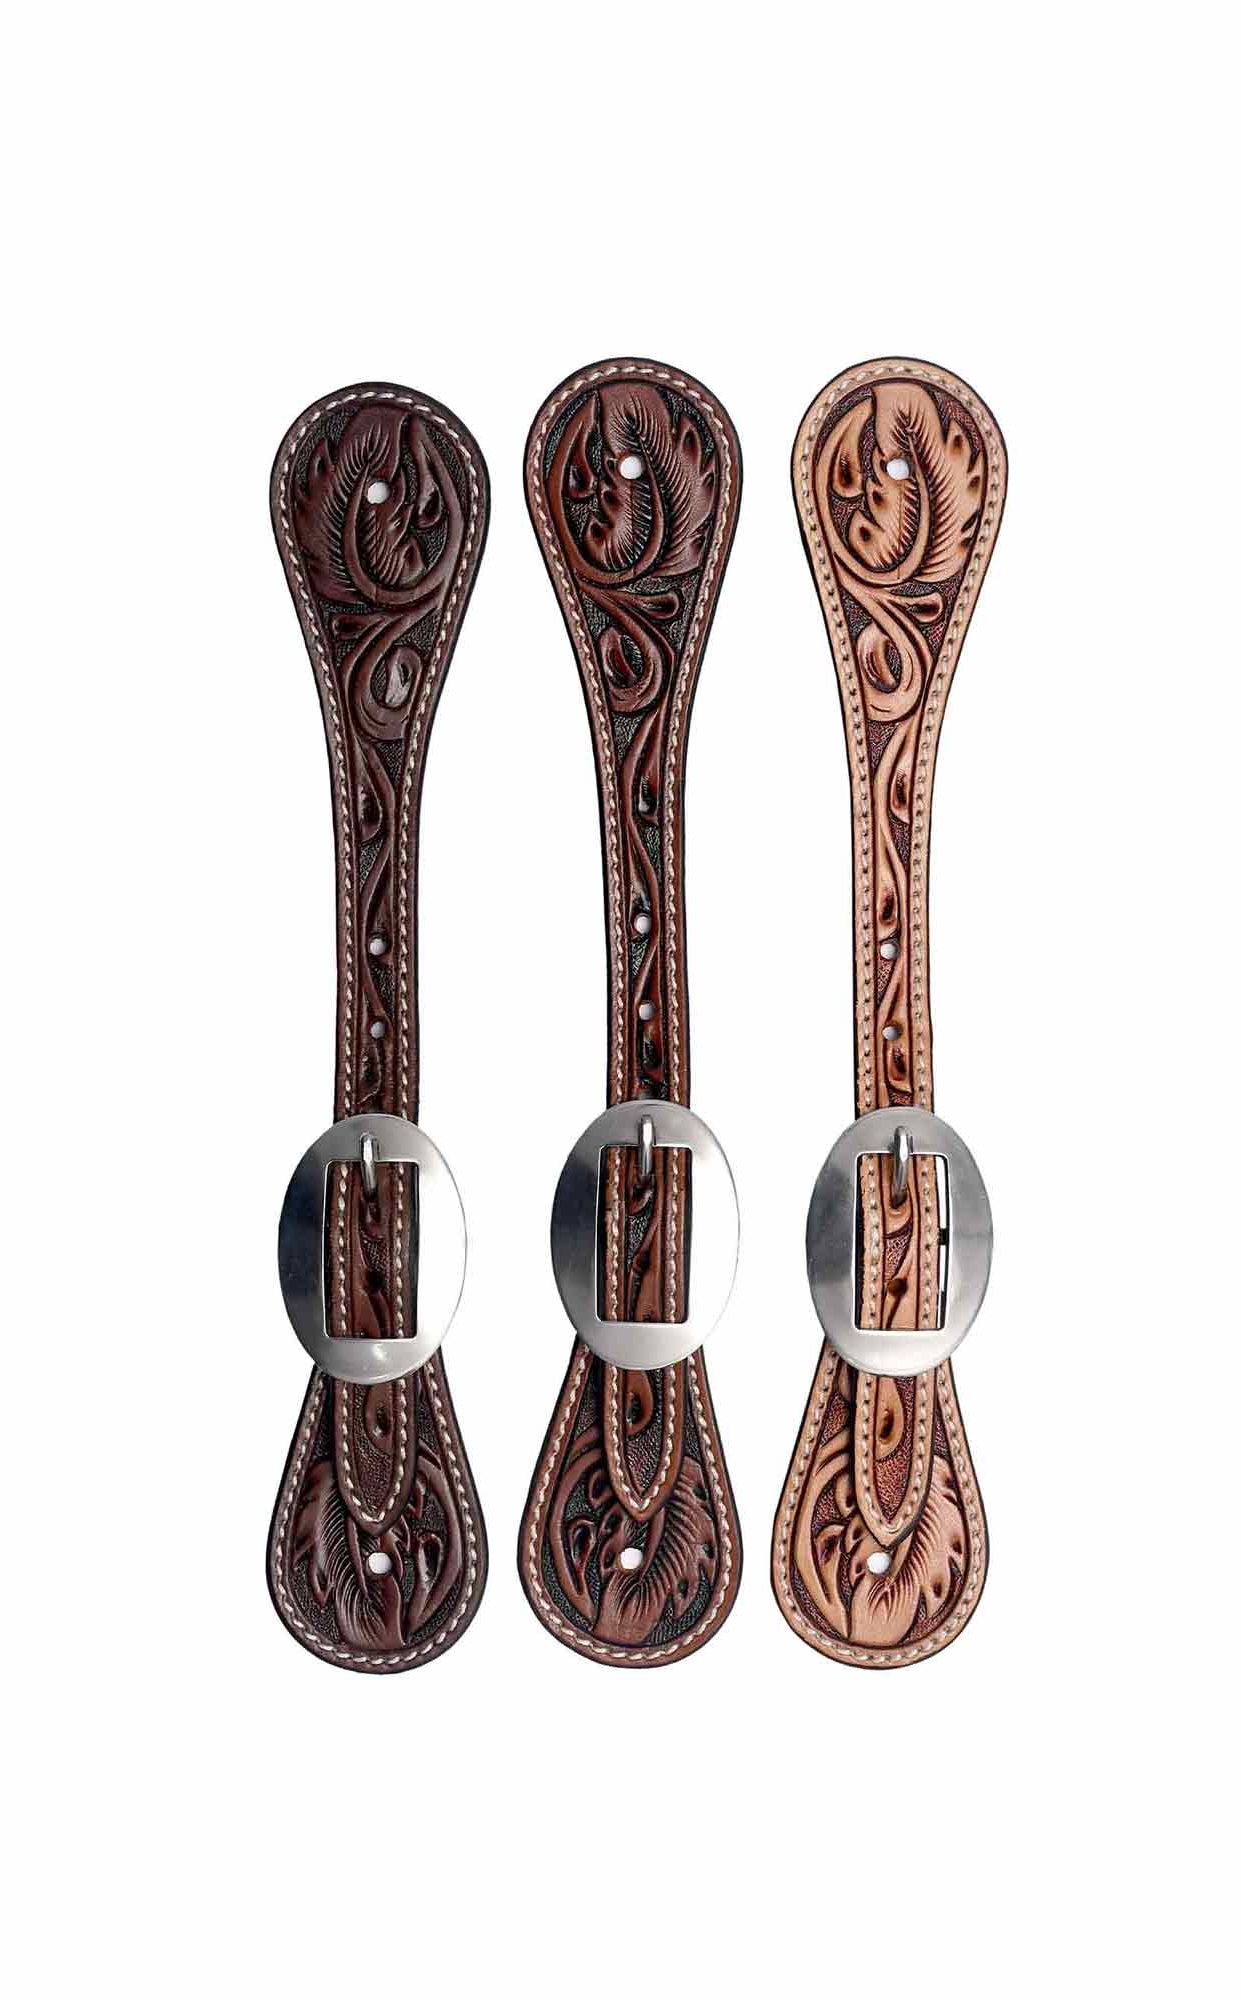 BLACK HOOF Floral Tooled Leather Spur Straps for Horse Riders | Western Men, Women, Adjustable Single Ply Spur Straps | Equestrian Accessories